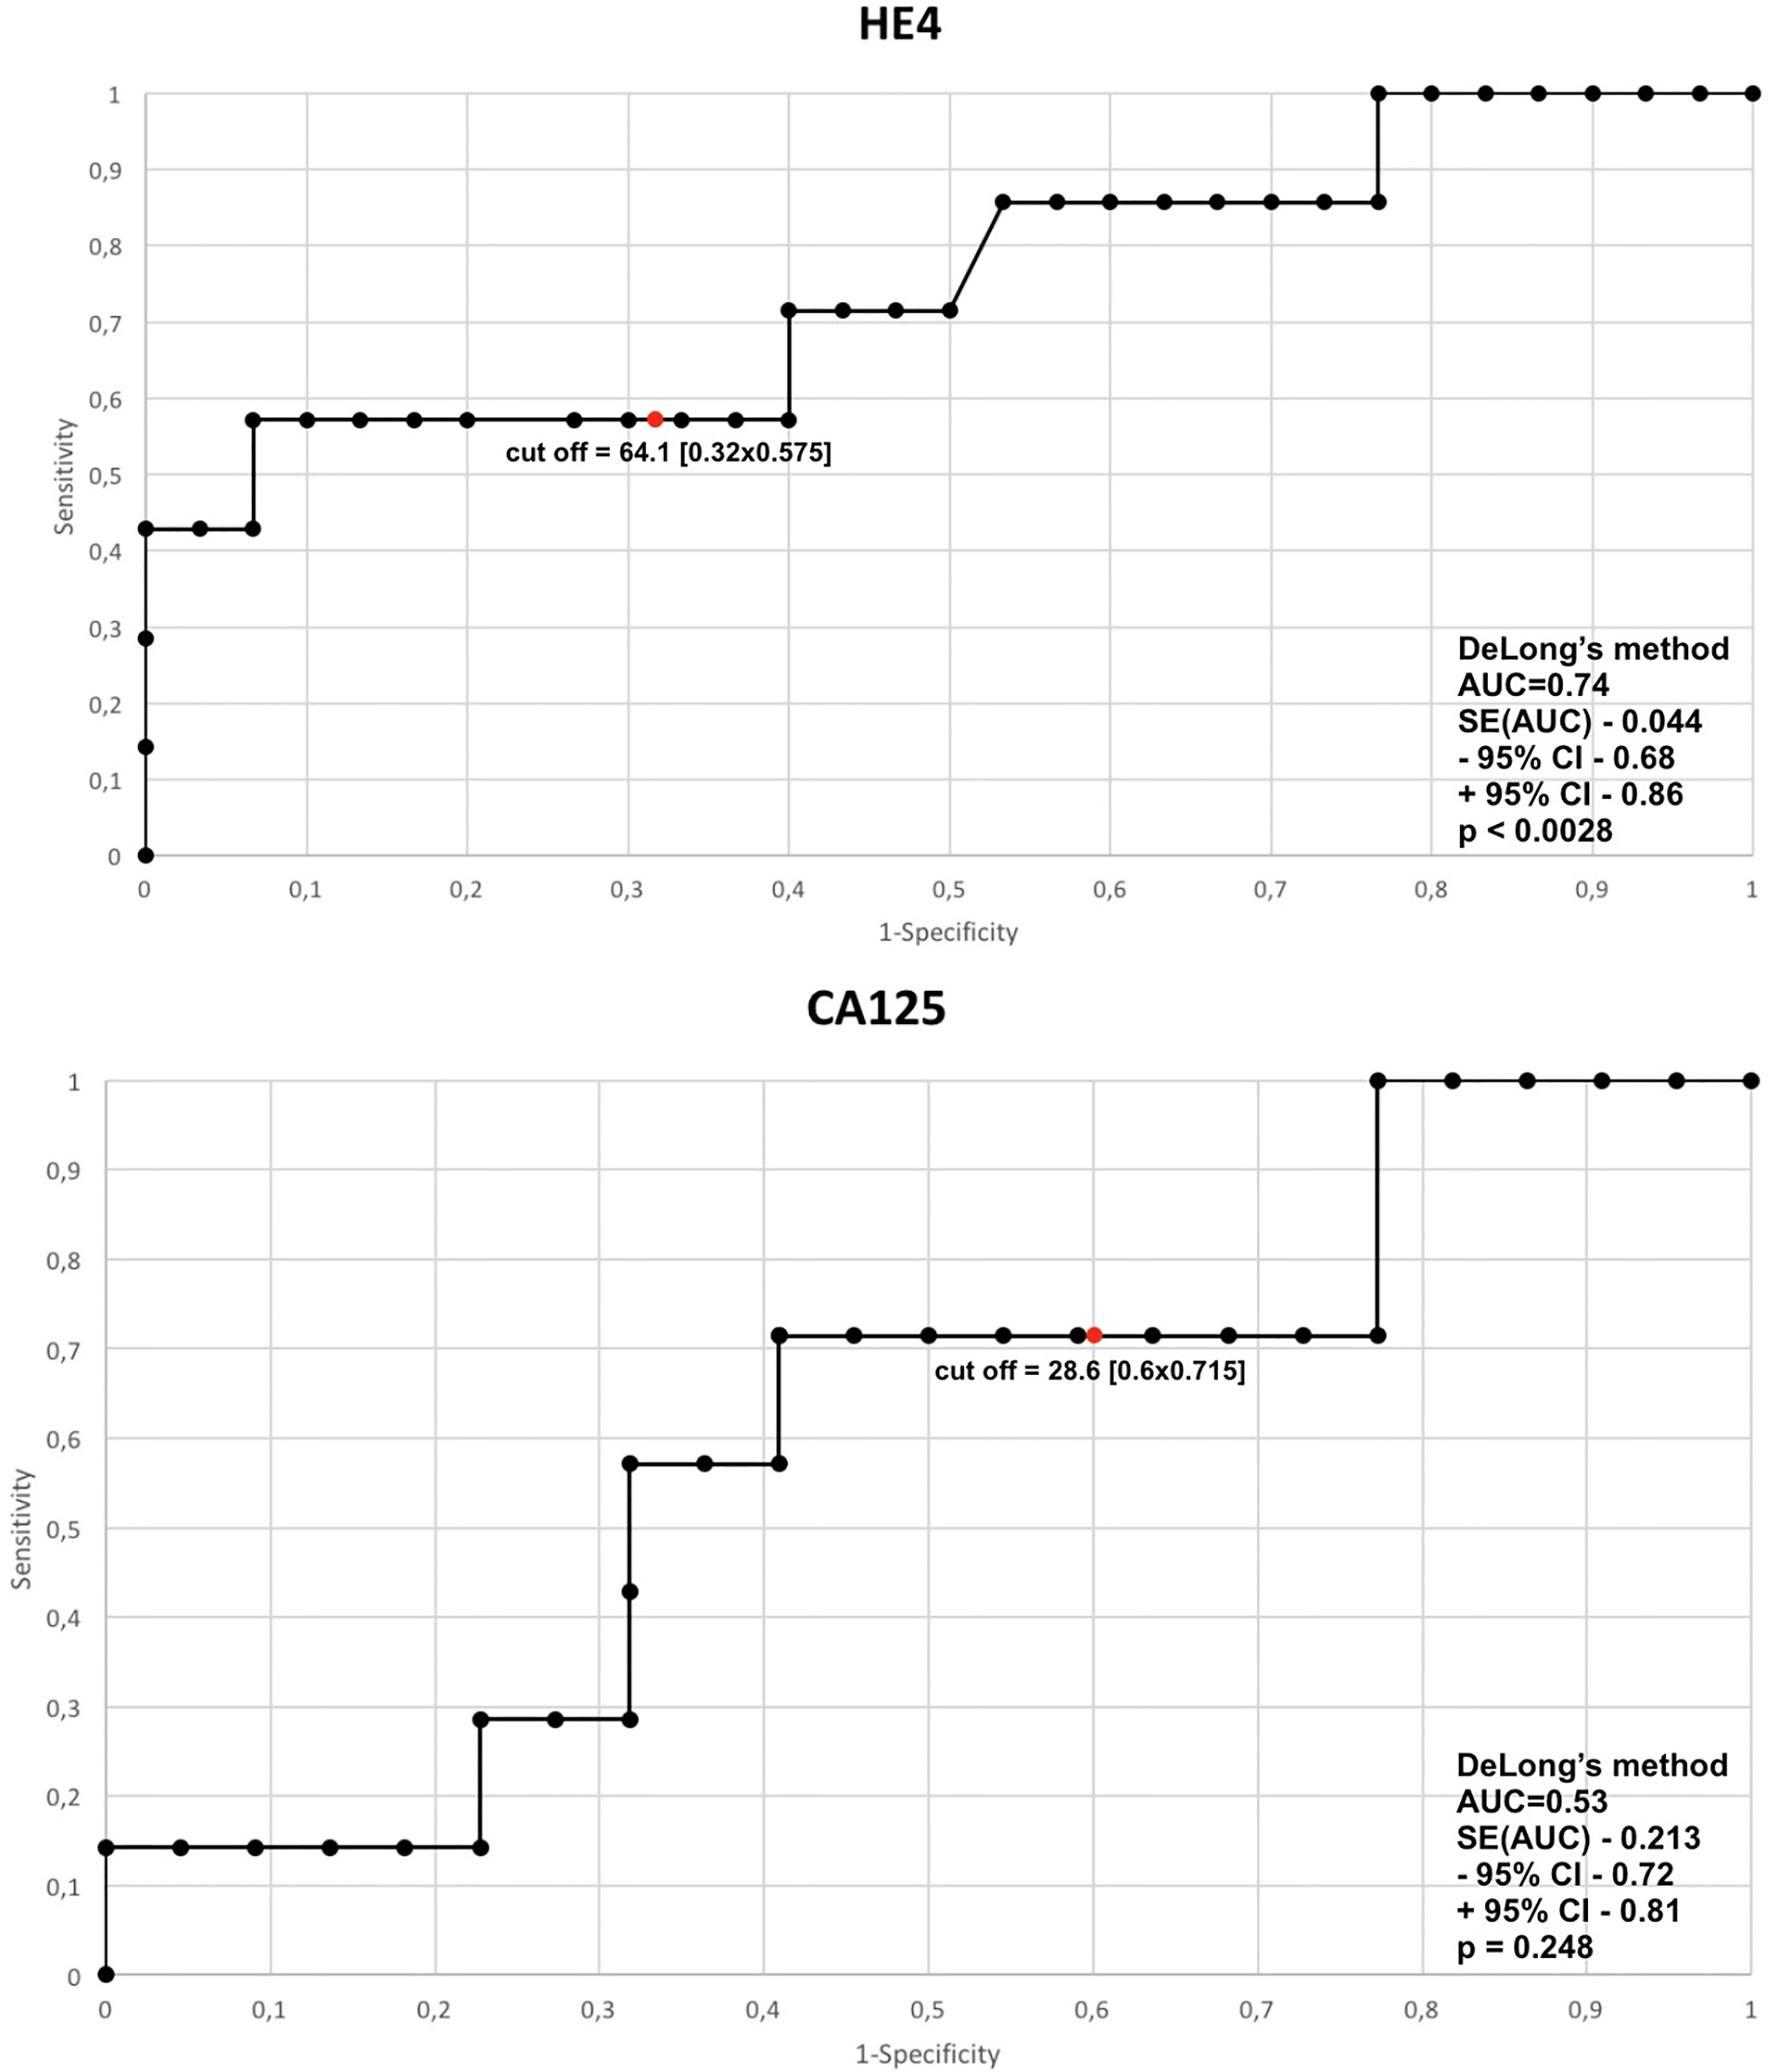 HE4 and CA125 ROC curves for endometrial cancers and endometrium benign changes.